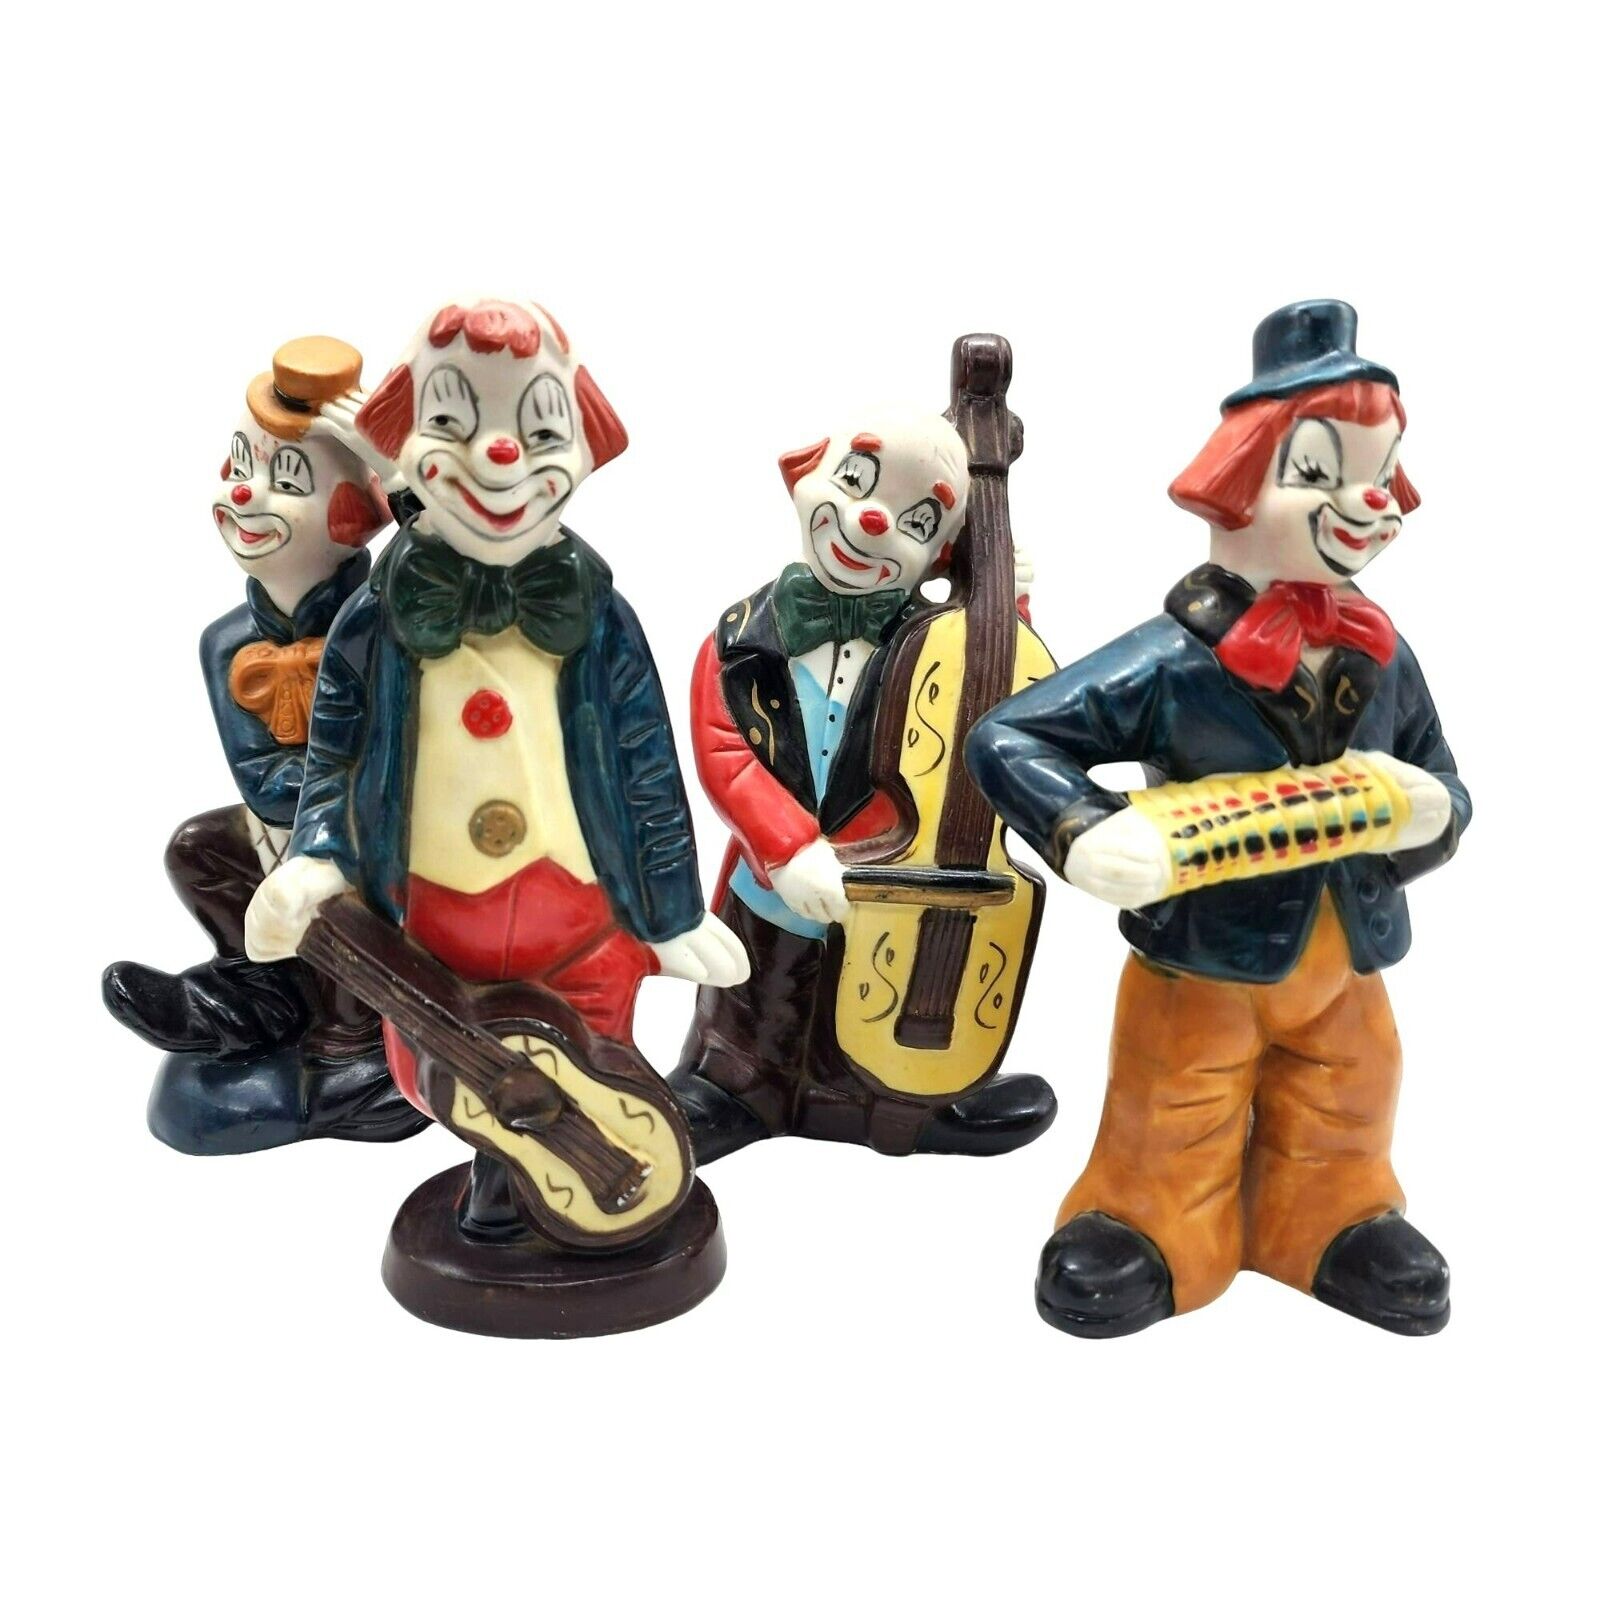 New Orleans Hobo Clown Band Figurines Set Ceramic Hand Painted 1970\'s Vintage